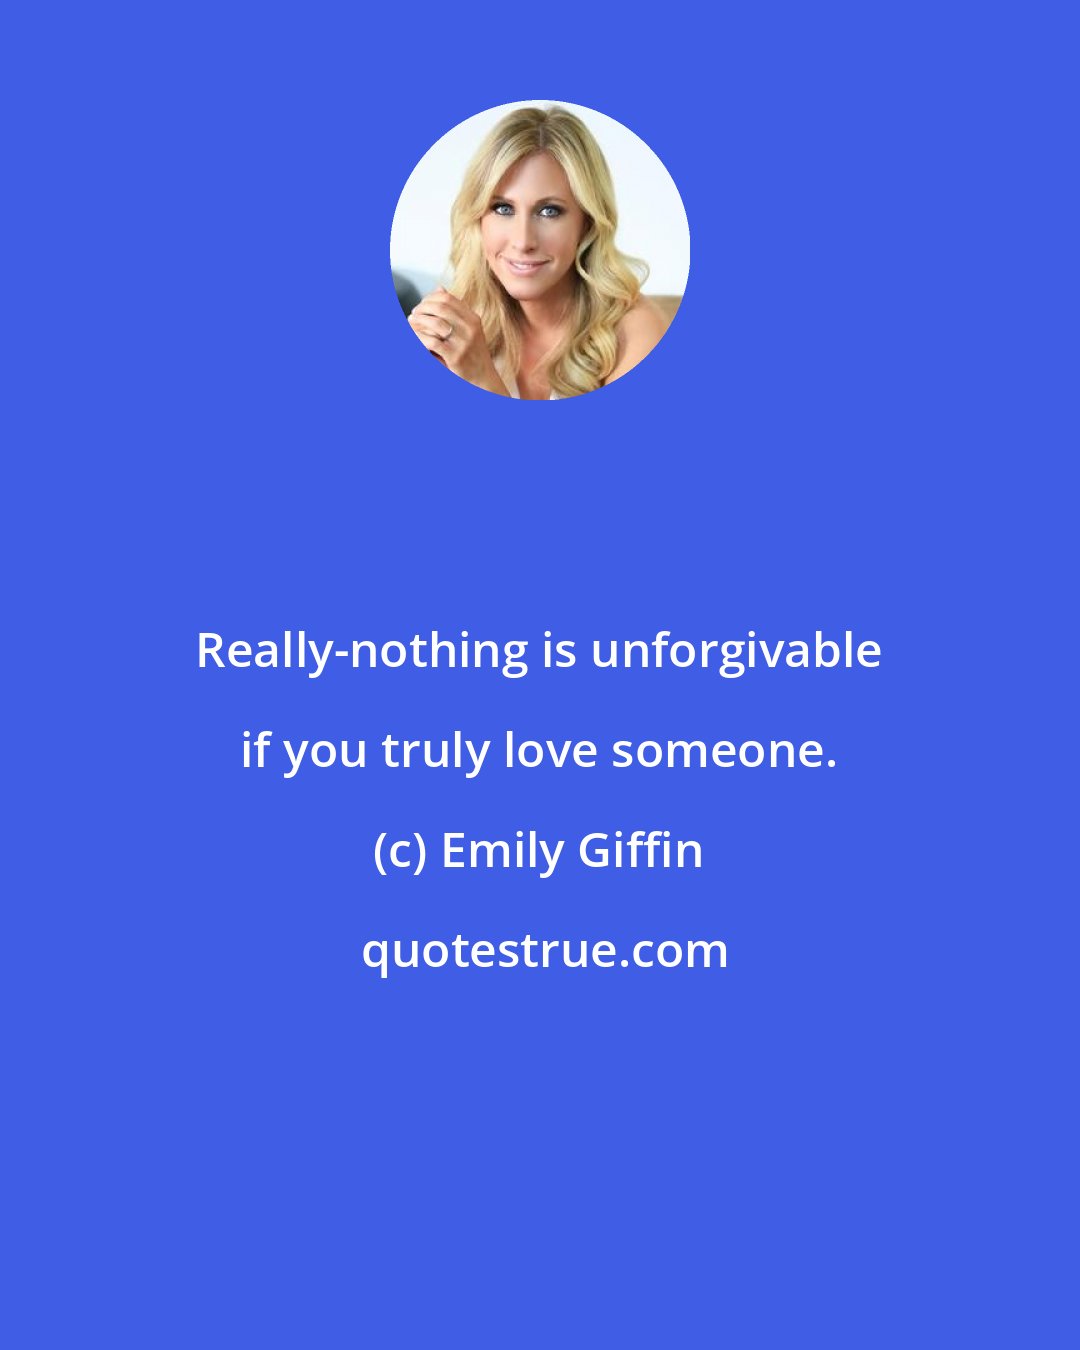 Emily Giffin: Really-nothing is unforgivable if you truly love someone.